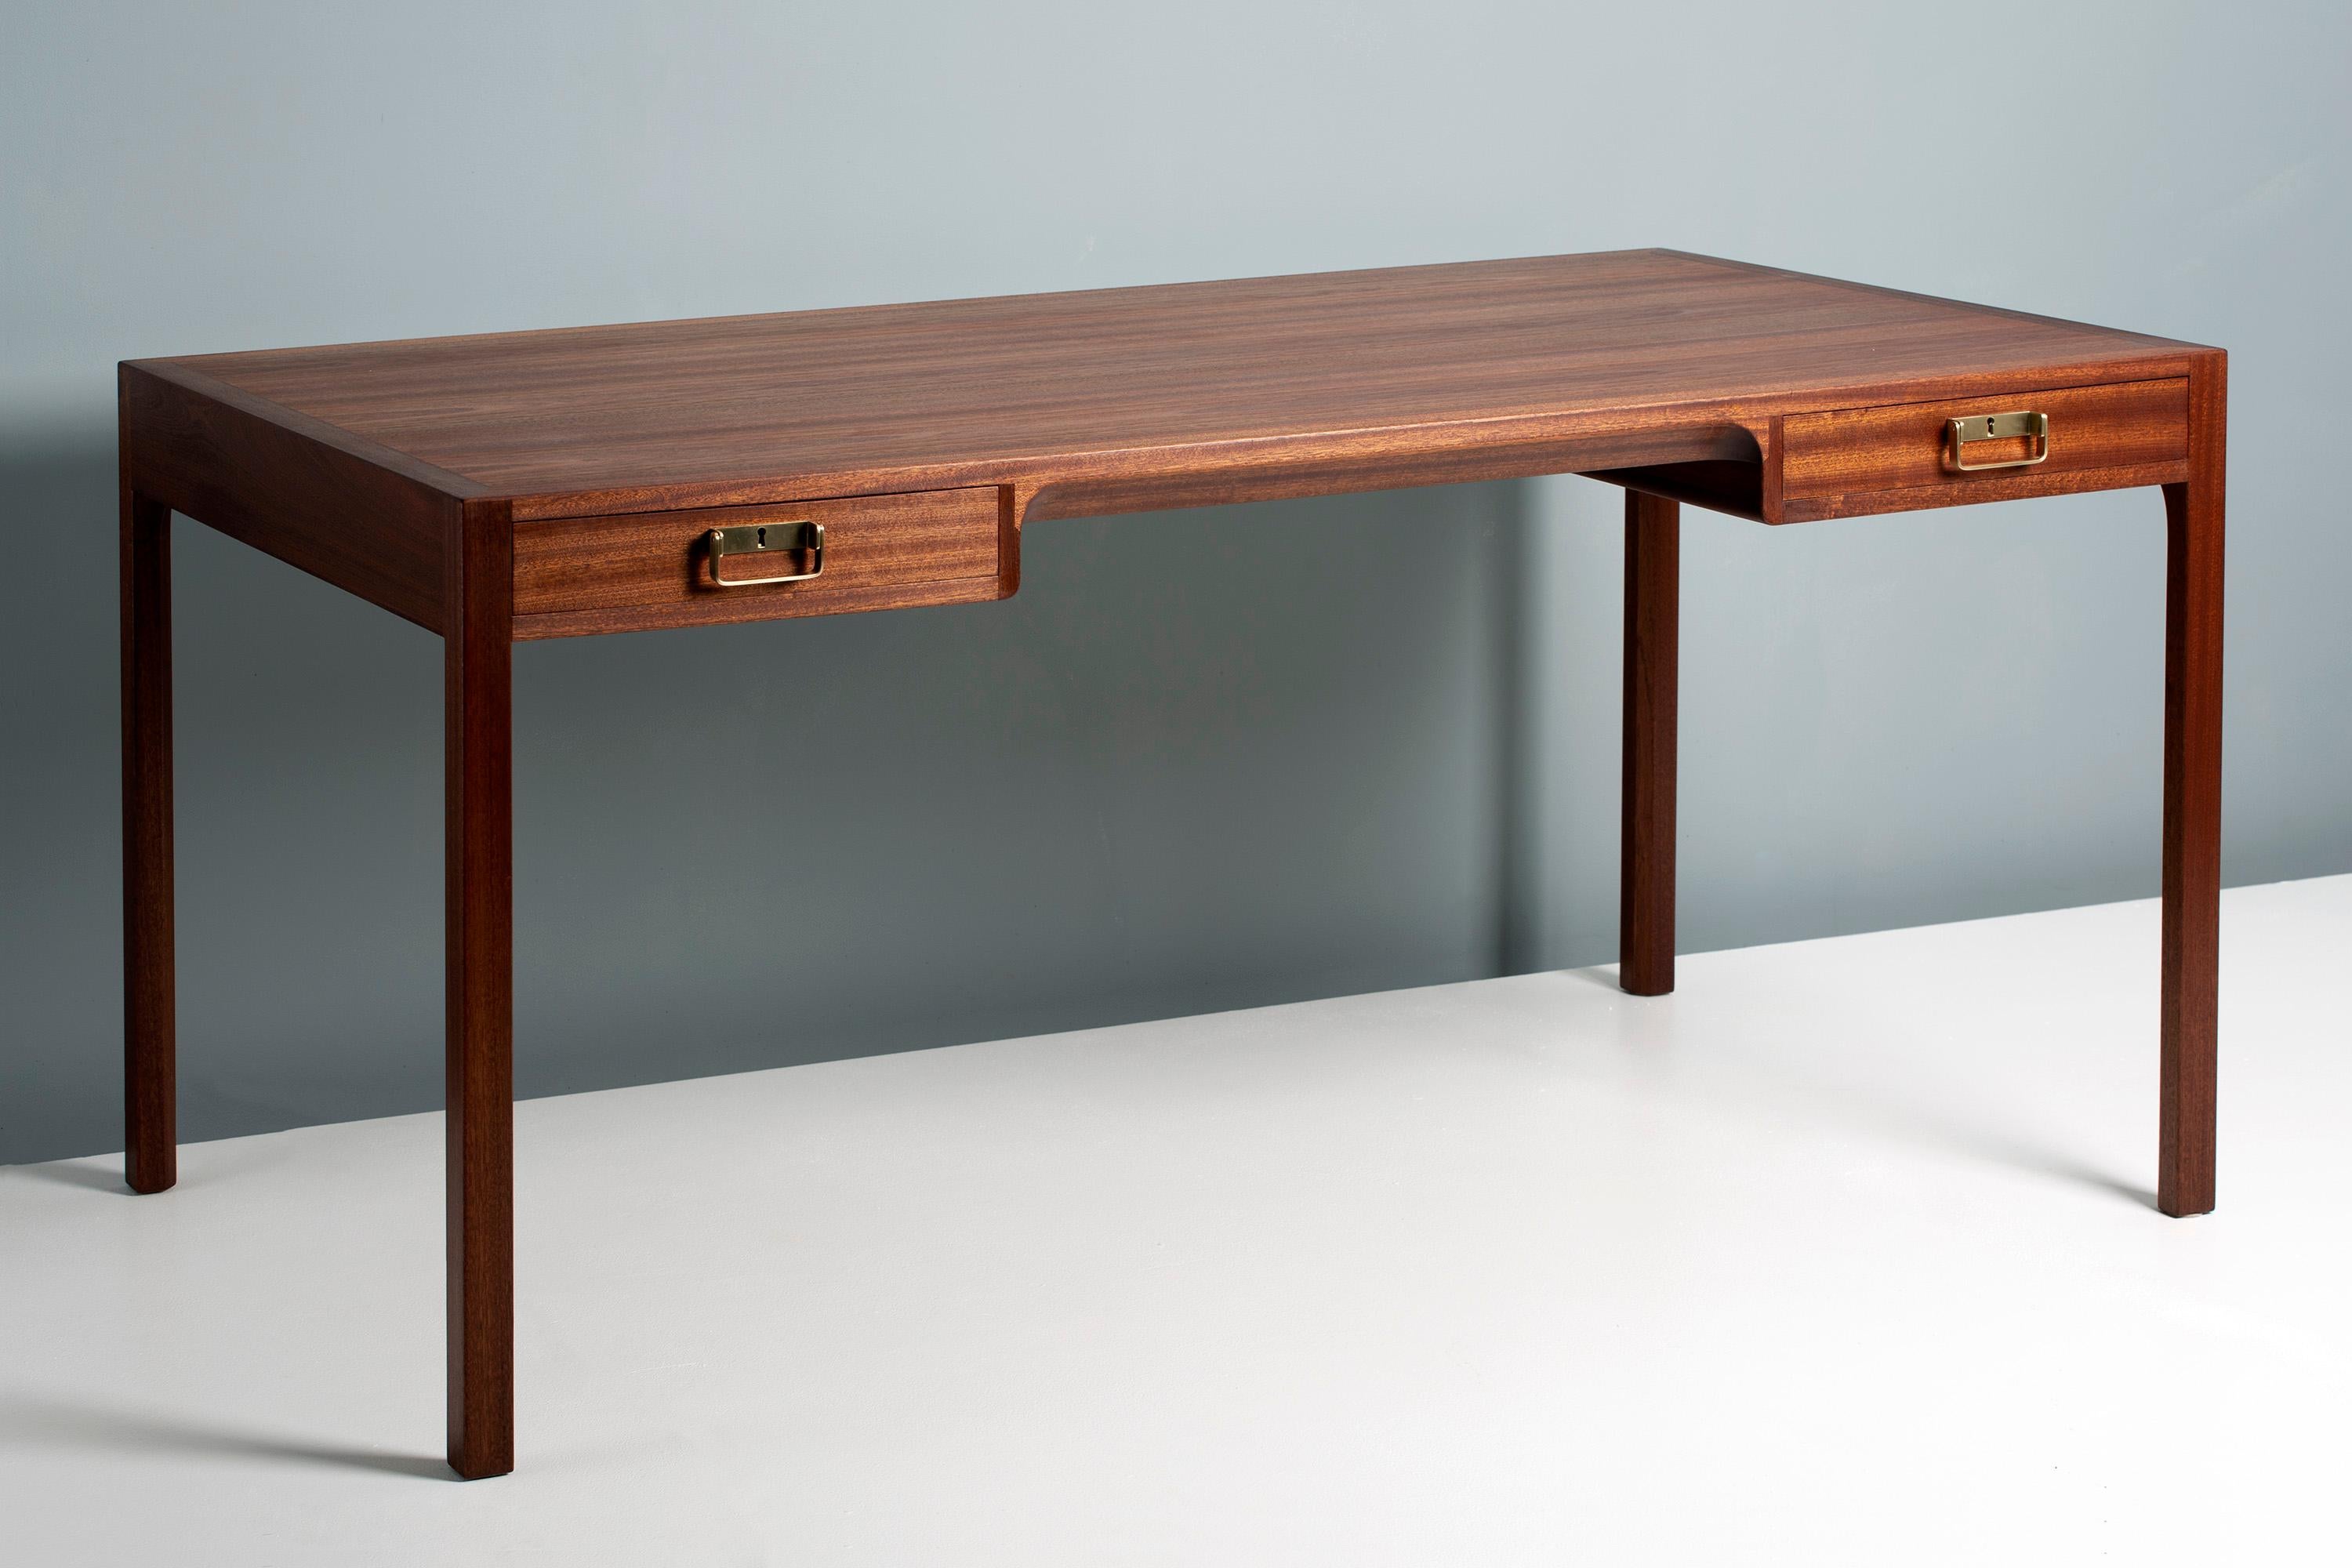 Bernt Petersen designed desk, produced in Denmark by master cabinetmakers Rud. Rasmussen, Denmark in the 1950s. Solid mahogany legs and drawer fronts, veneer top. Solid oak drawer inserts with patinated brass handles and locks.